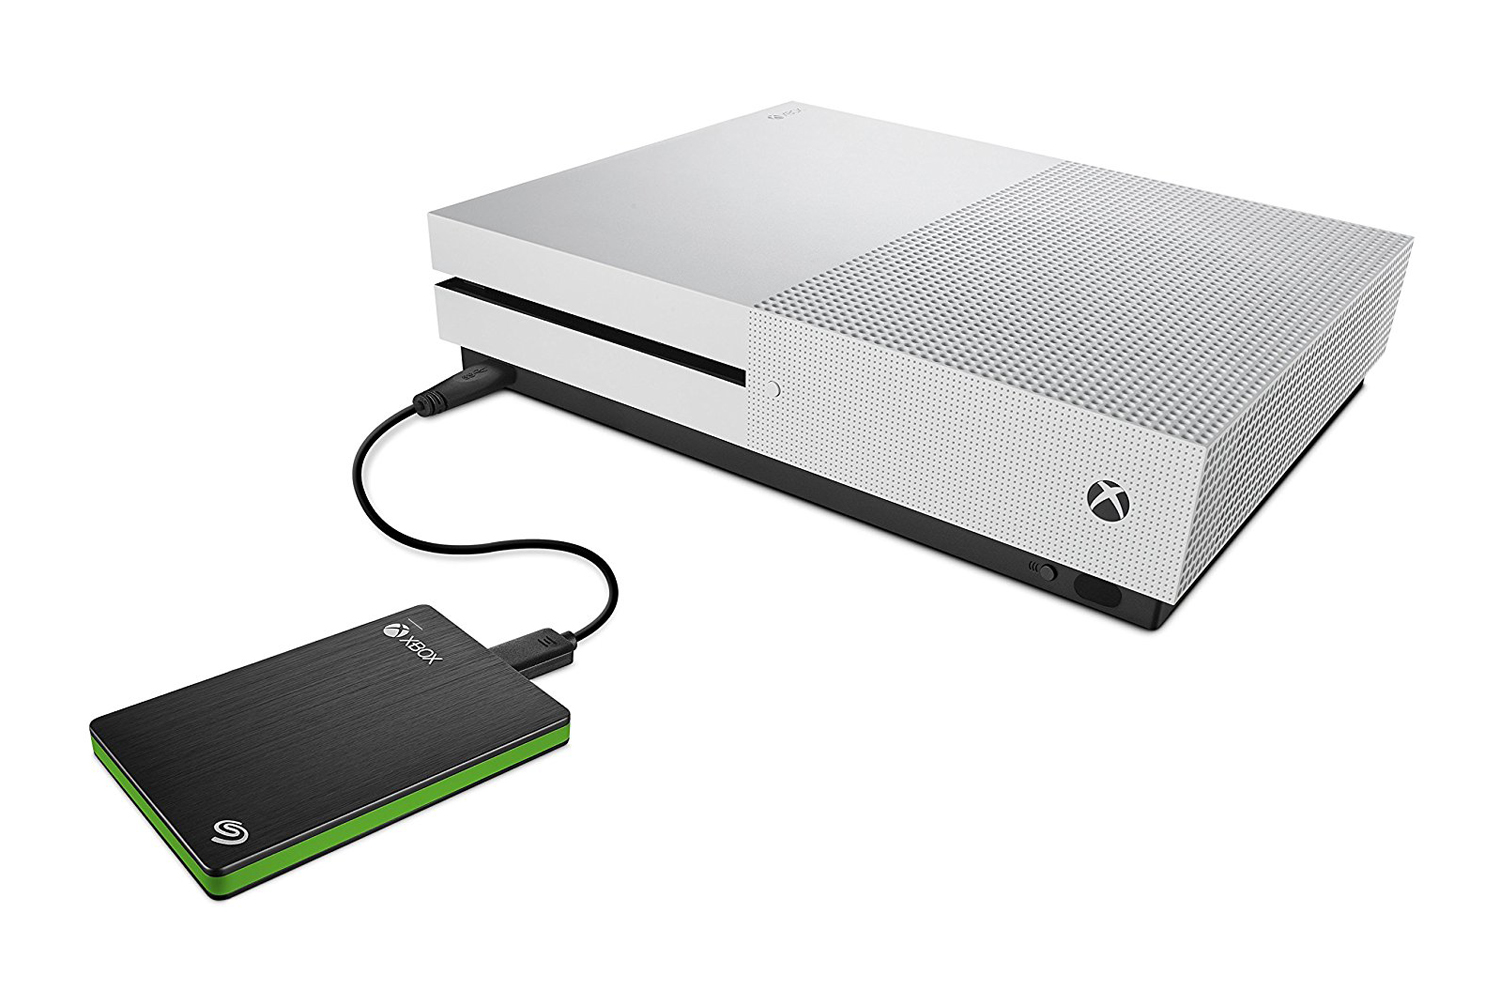 Dakraam Airco Afwijzen How to Upgrade Your Xbox One or PlayStation 4 Hard Drive | Digital Trends